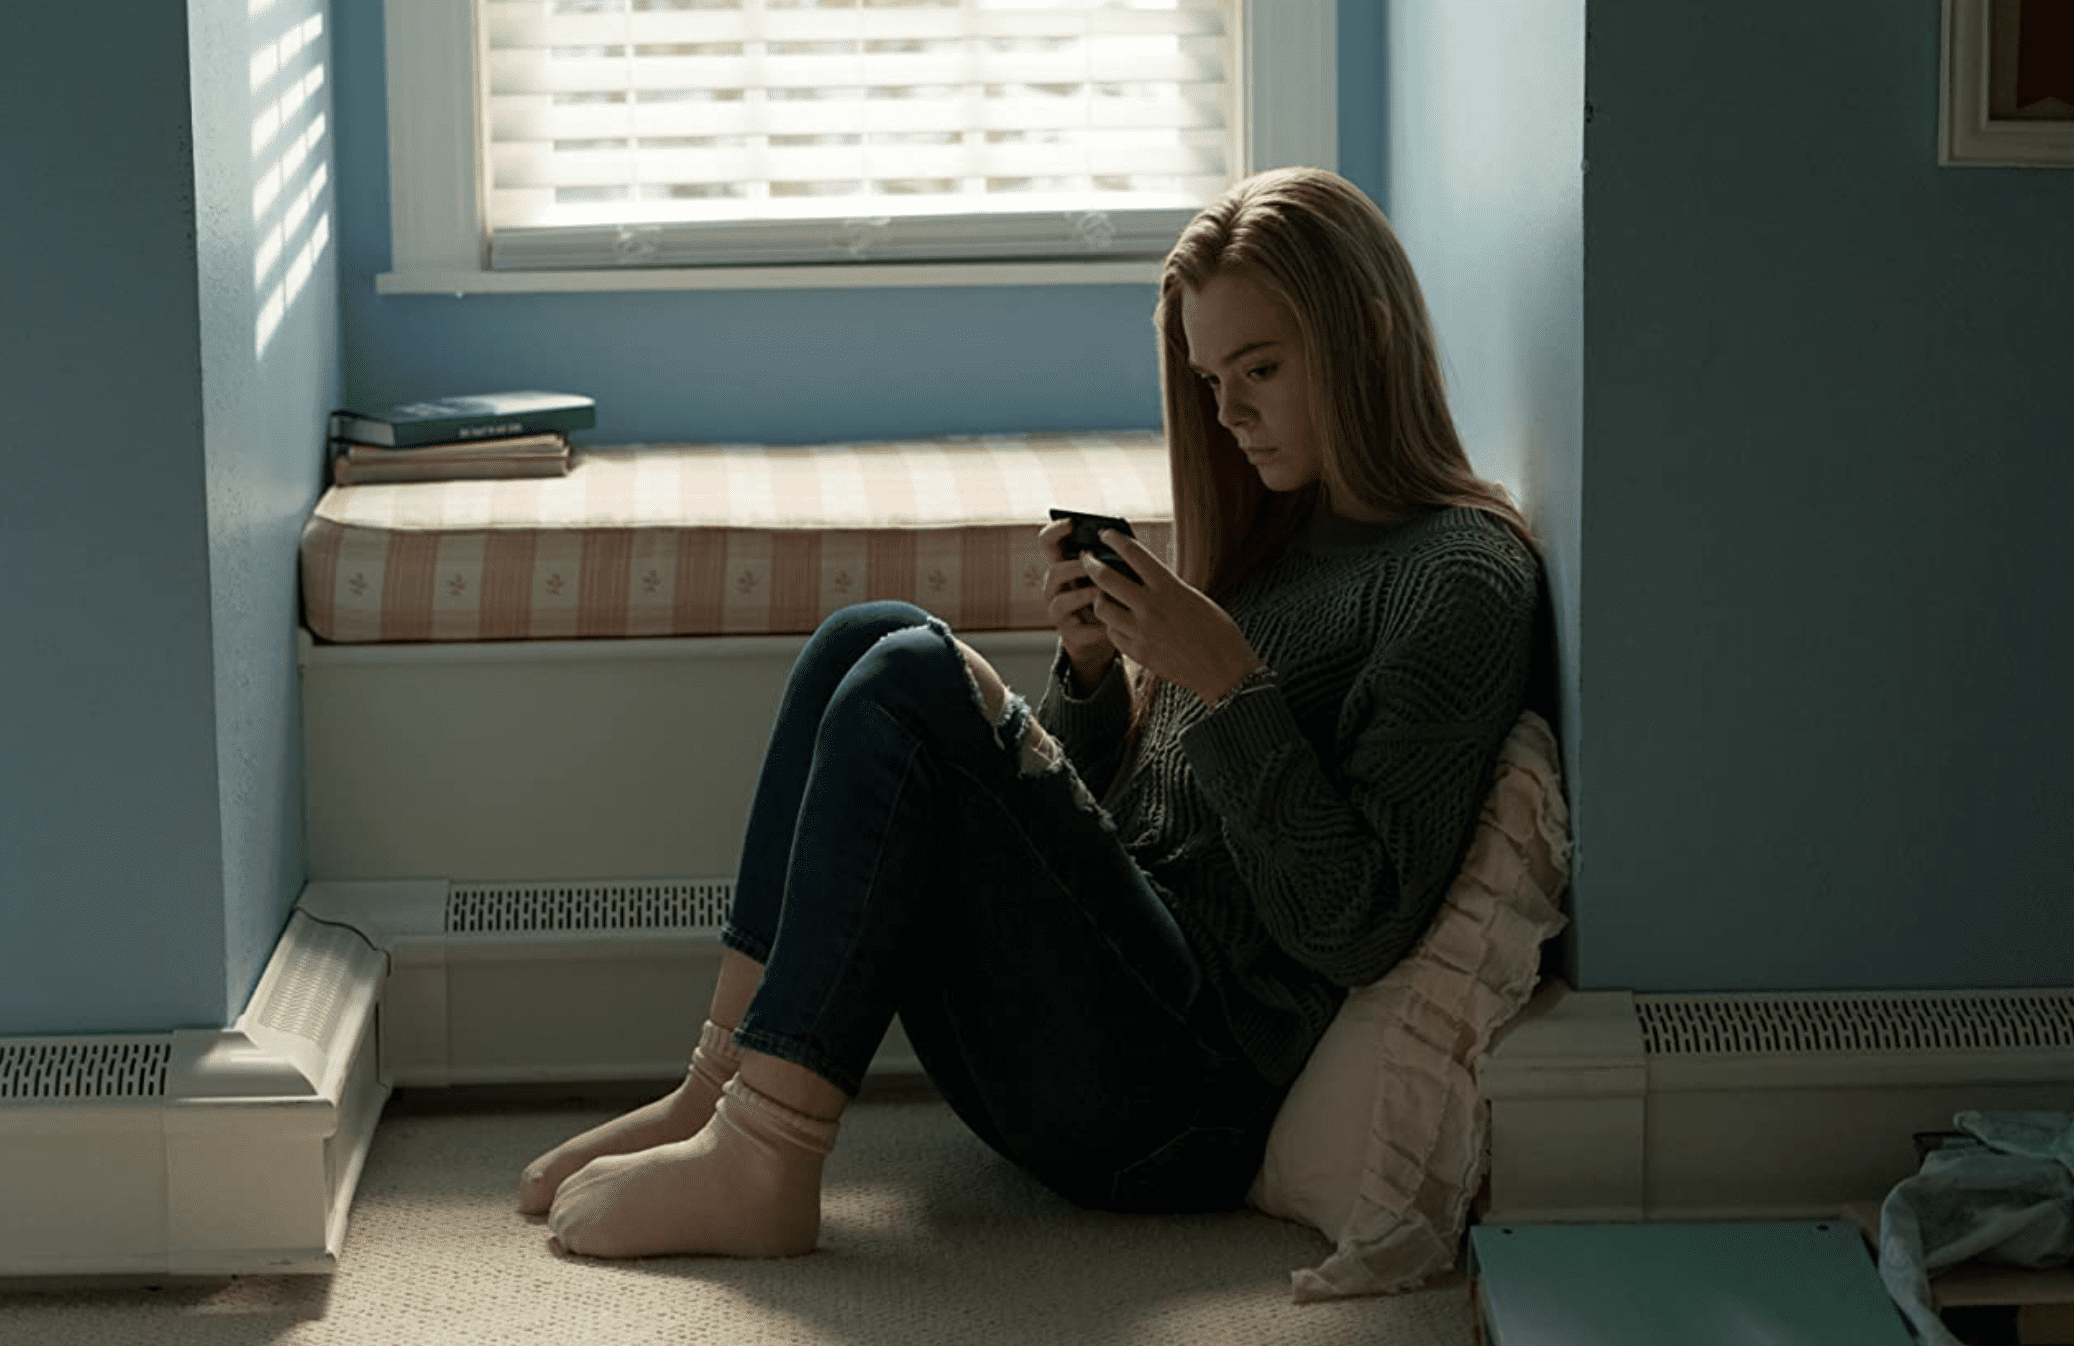 Michelle sits on her bedroom floor and texts